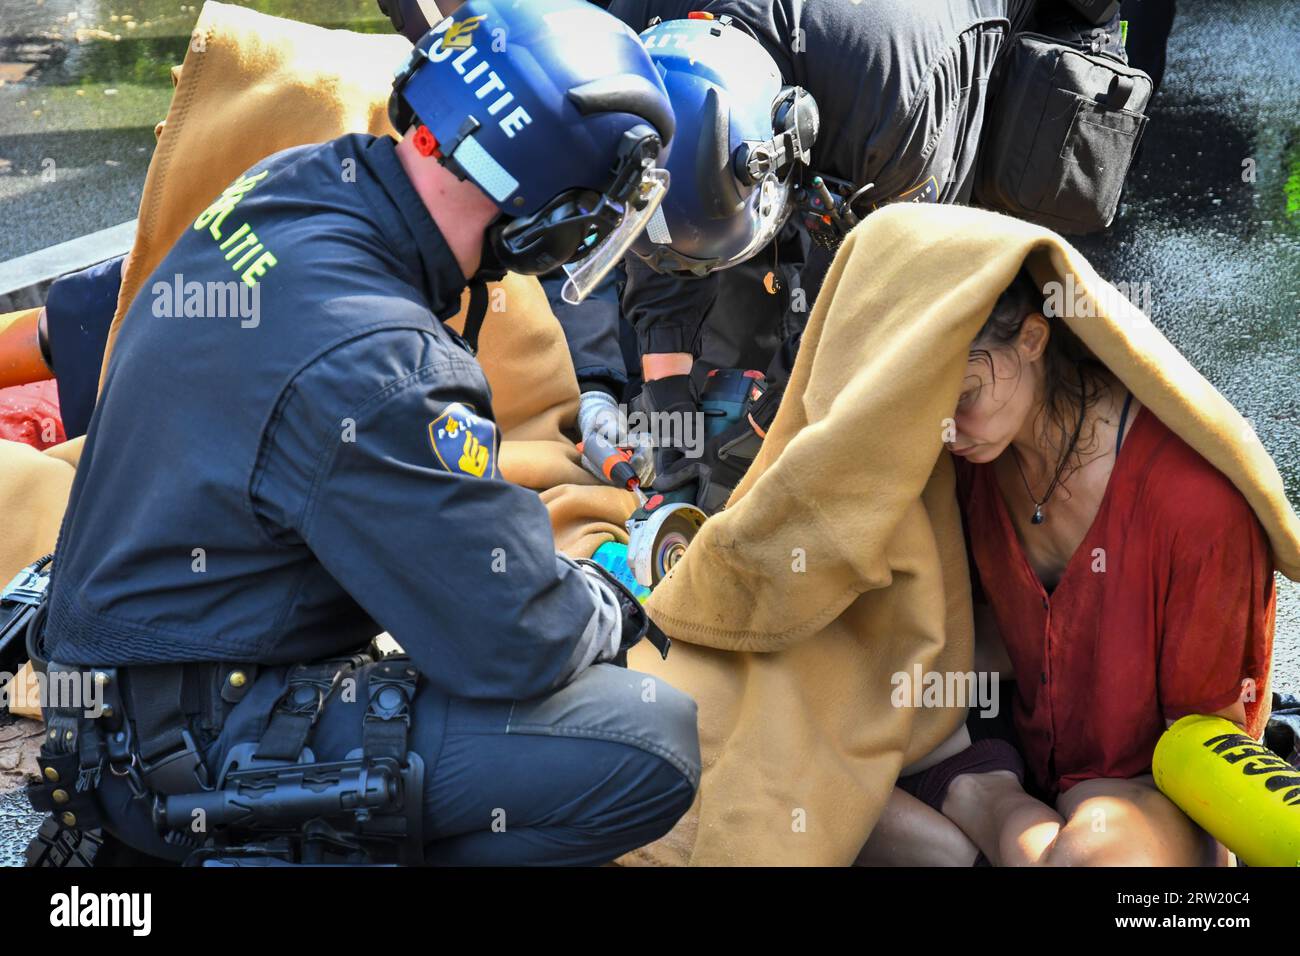 The Hague,TheNetherlands, 16th september,2023. Extinction rebellion protested by blocking the A12 motorway for the 8th day in a row.  Watercannons were used and police removed and arrested a few hundred people.Credit:Pmvfoto/Alamy Live News Stock Photo